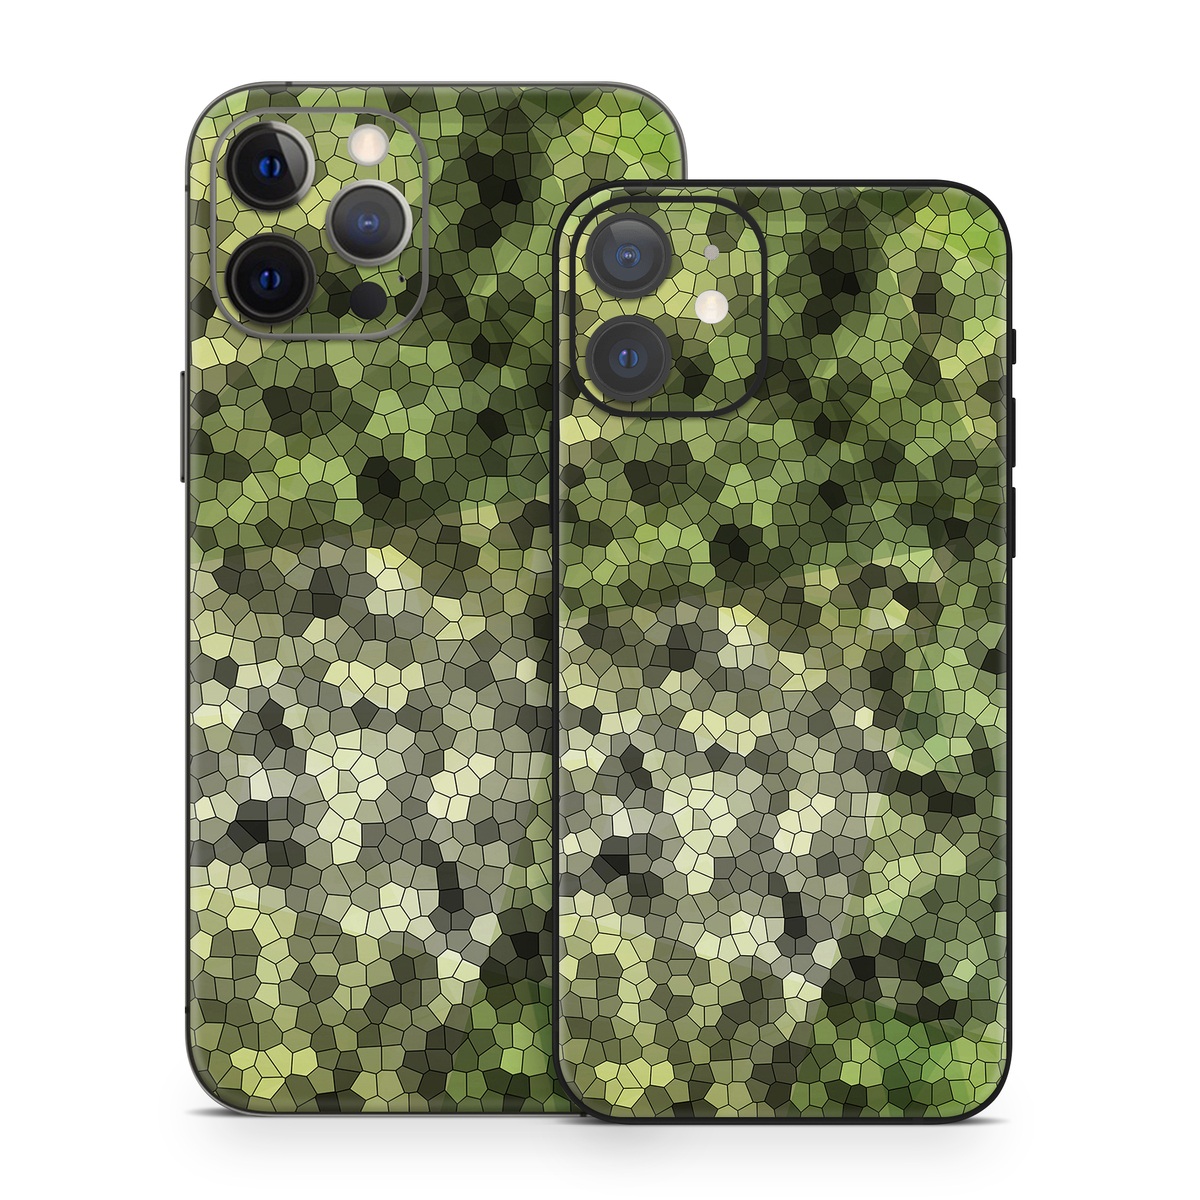 iPhone 12 Skin design of Green, Grass, Leaf, Plant, Pattern, Groundcover, with black, white, green, gray colors